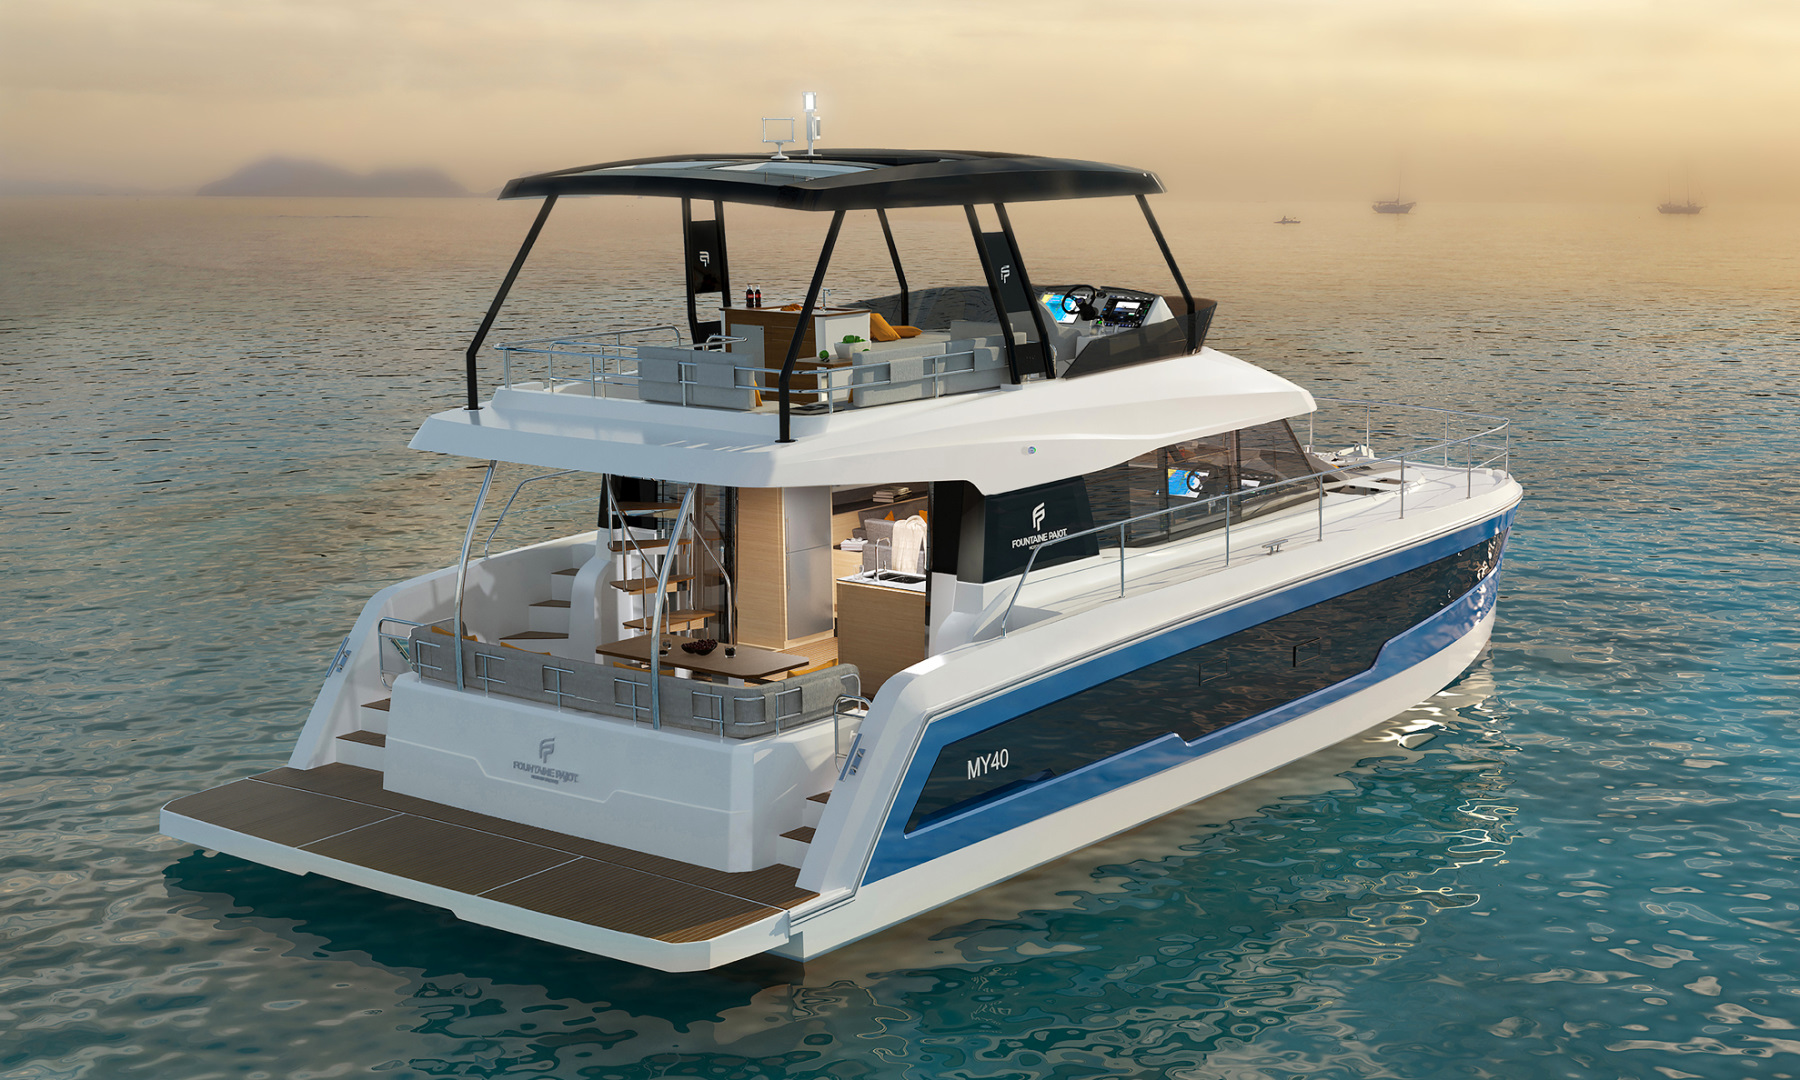 New Power Catamaran for Sale 2020 MY 40 Boat Highlights